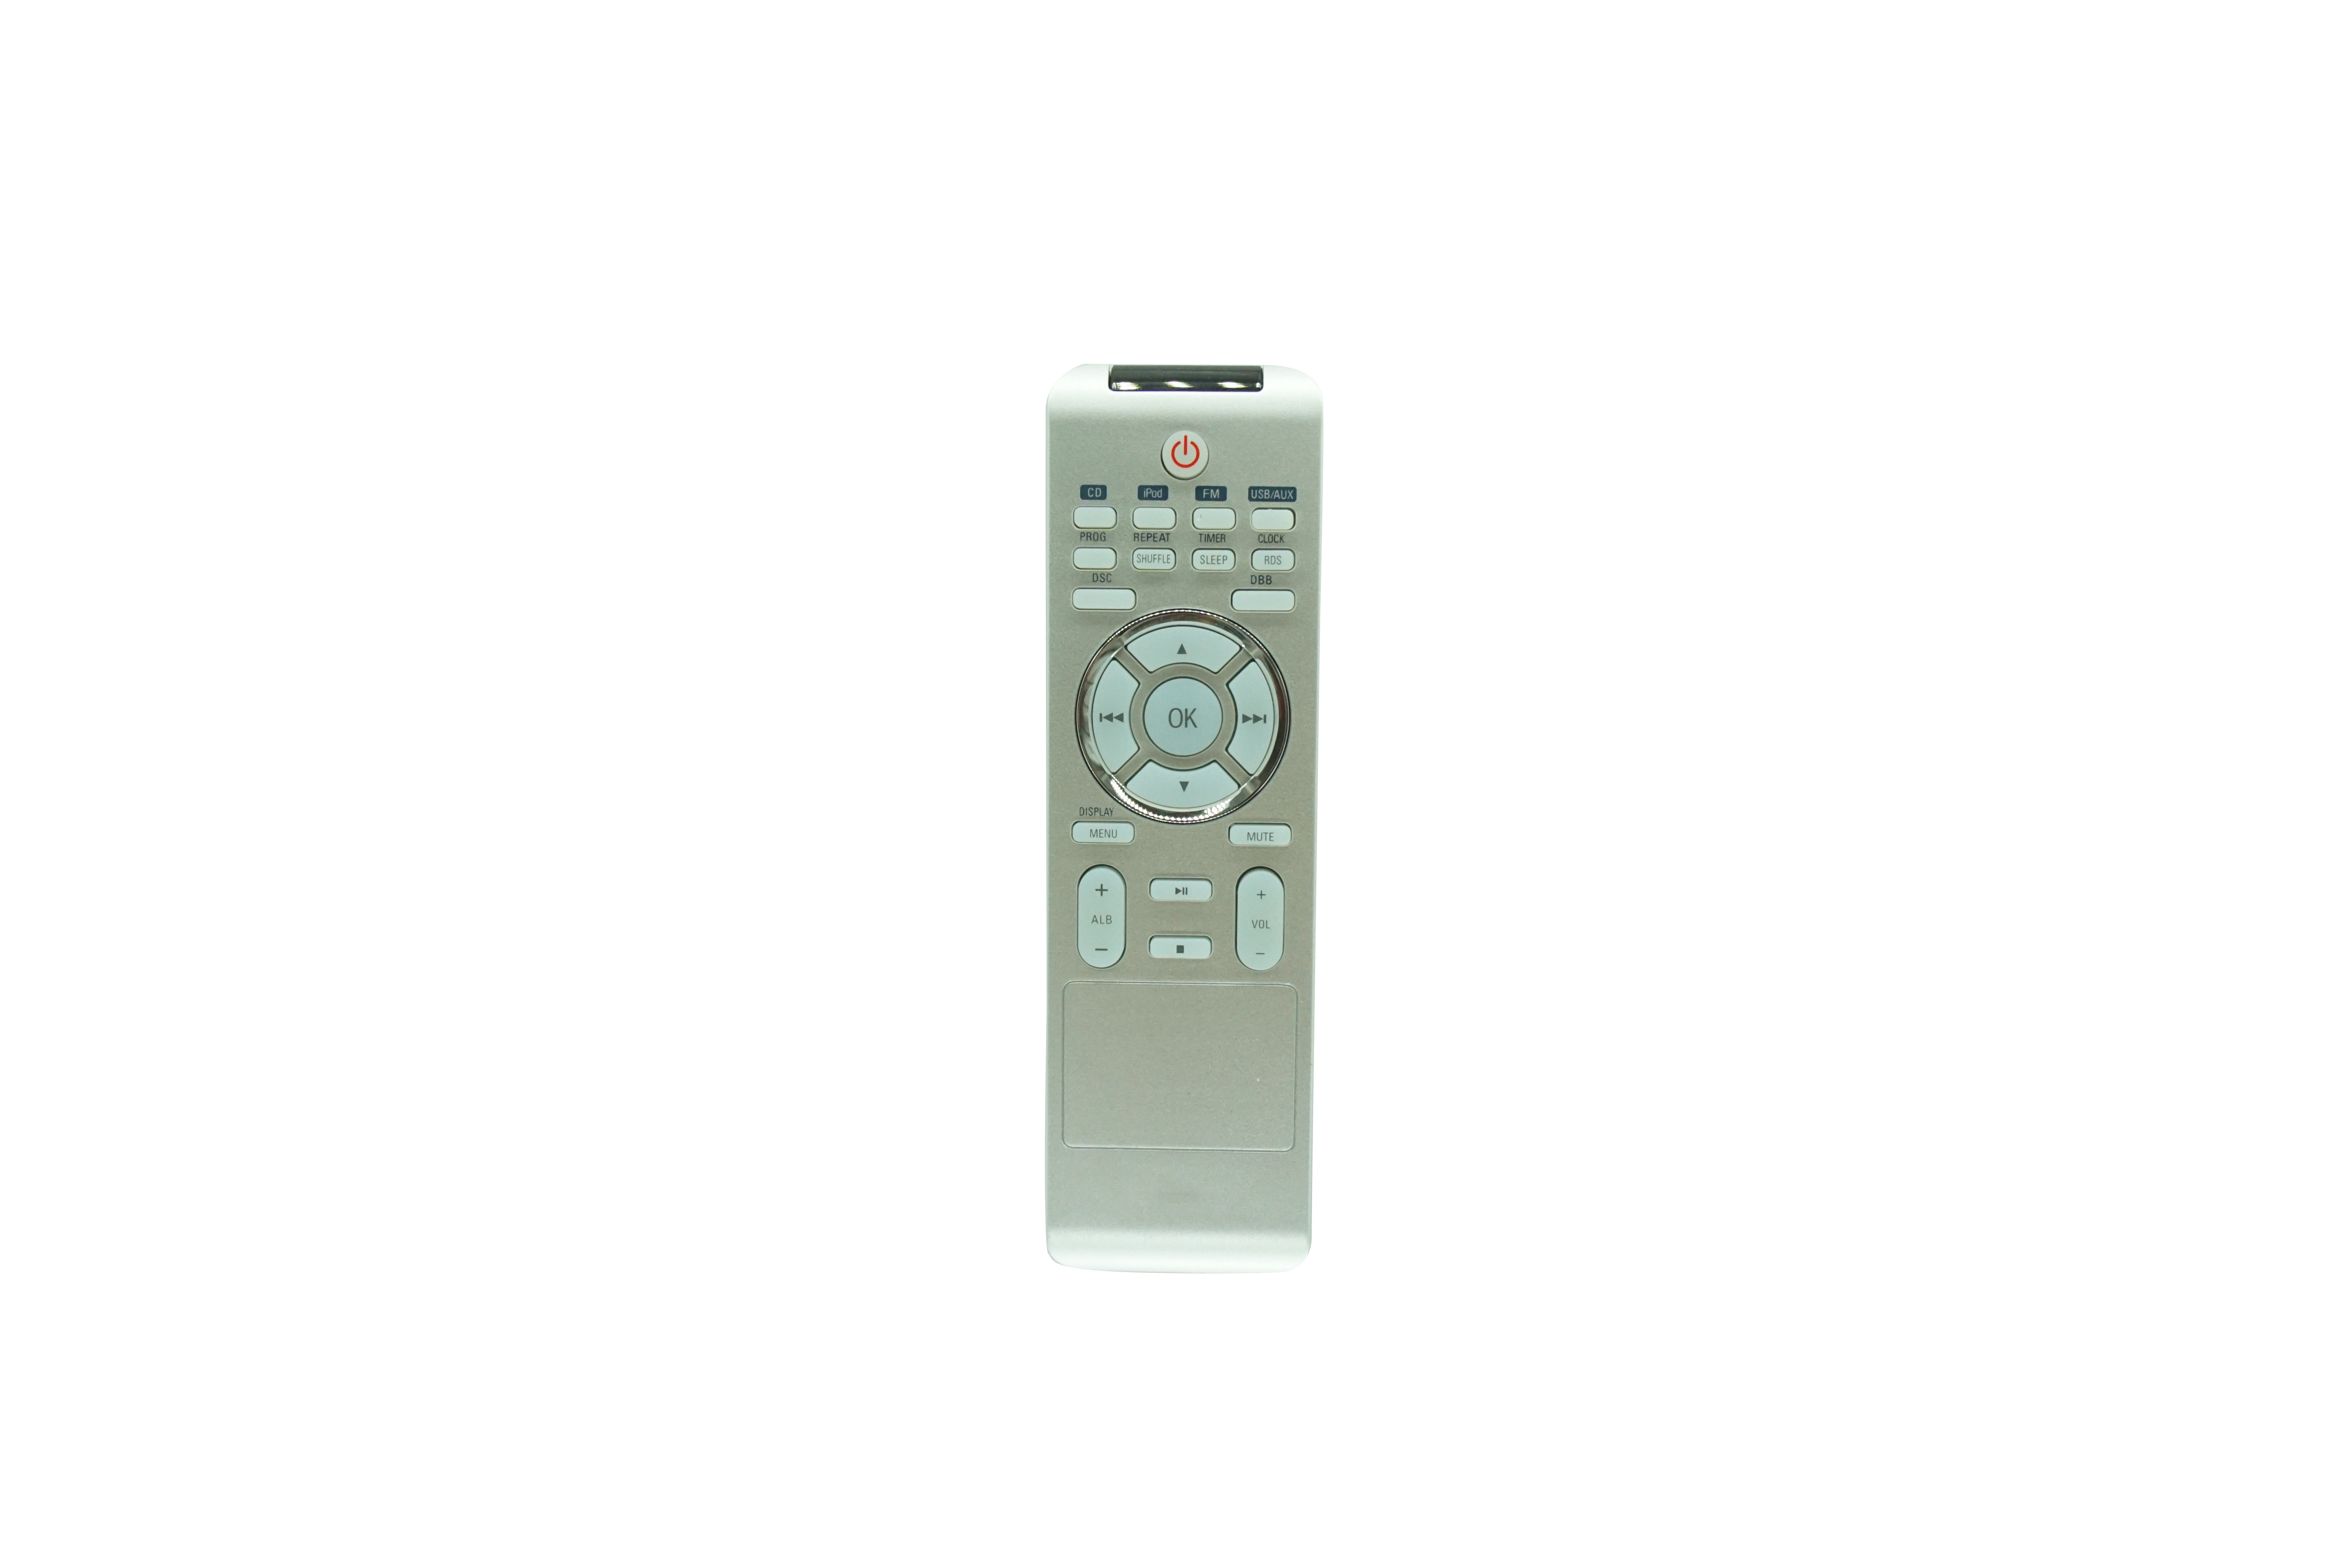 

Remote Control For Philips MCM196D/37 MCM196D/37B MCM398D/12 MCM398D/05 MCM395/12 MCM393/12 MCM394/12 MCM239/55 MCM239/96 MCM239/12 Micro Hi-Fi Stereo Music System